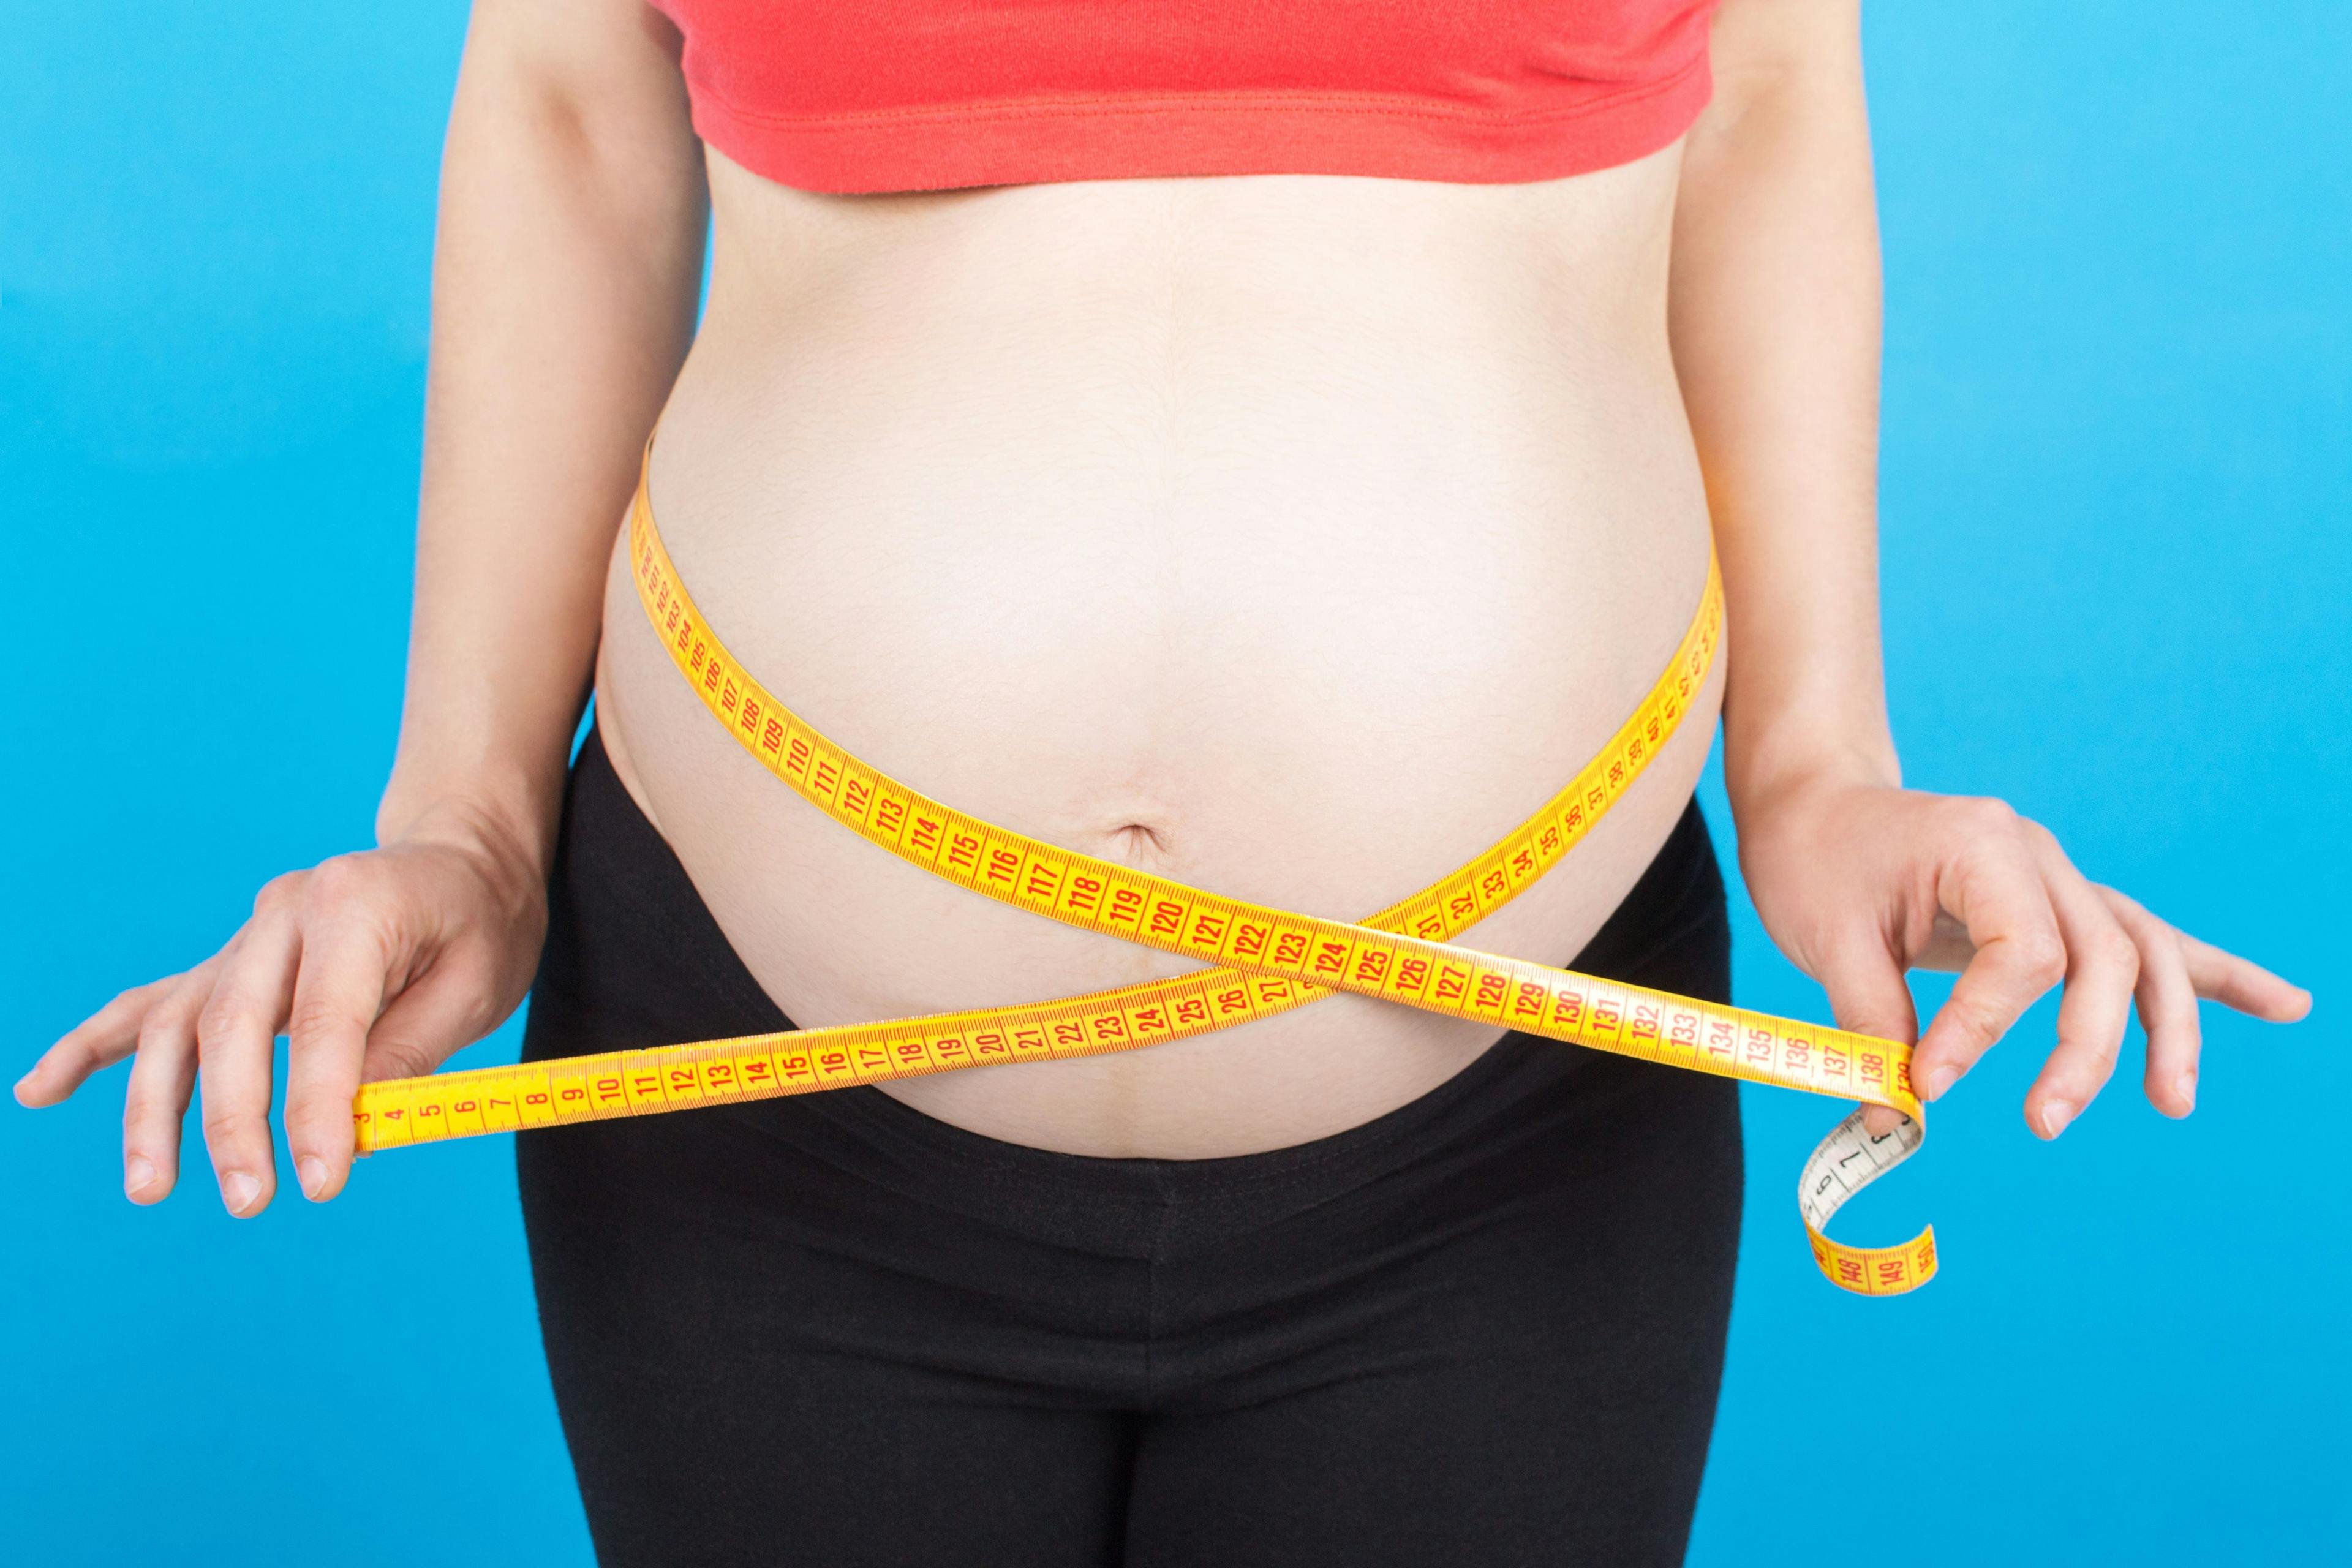 Gestational weight gain linked to increased infant morbidity and mortality